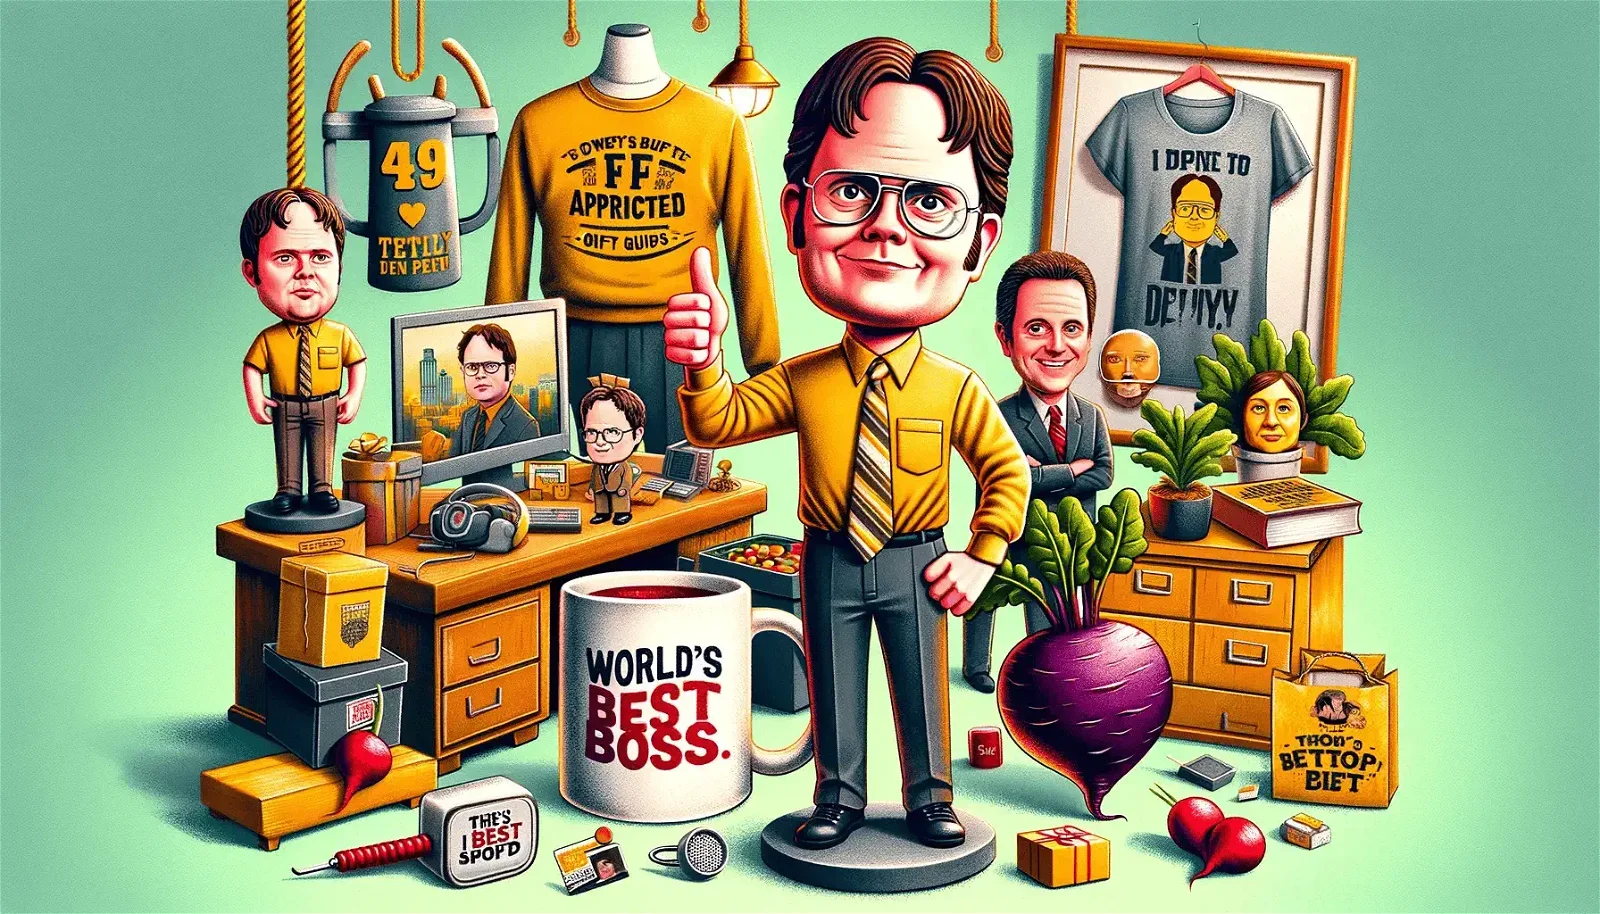 The Office Merchandise - Dwight Schrute Silhouette Decorative